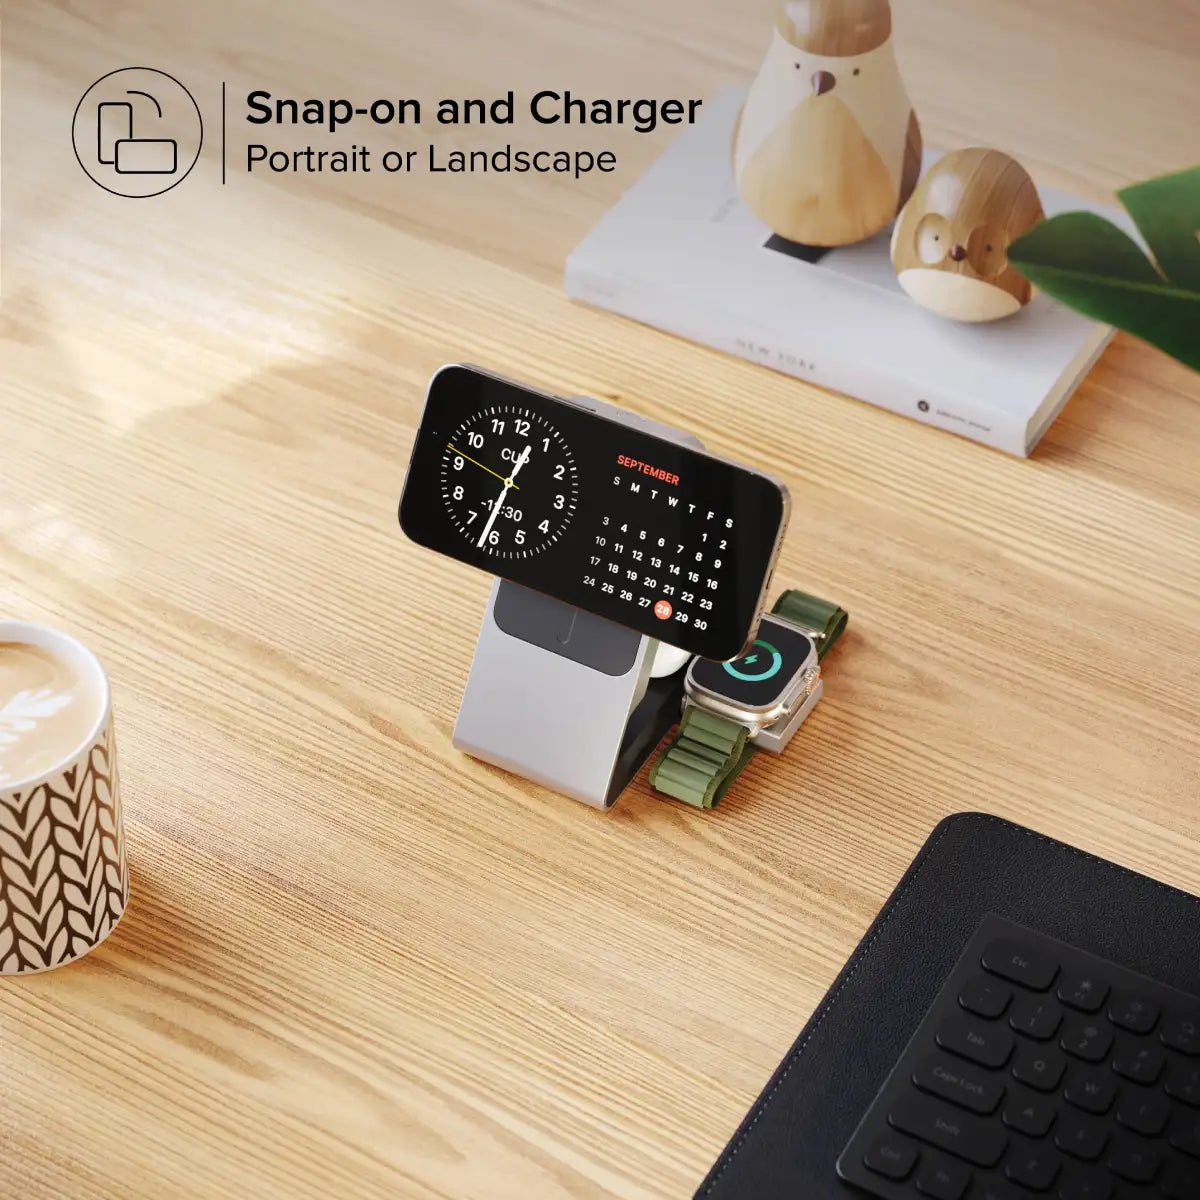 Matrix+ Flow 3-in-1 Charging Dock with Wireless 5000mAH Power Bank and Car Charger Cradle